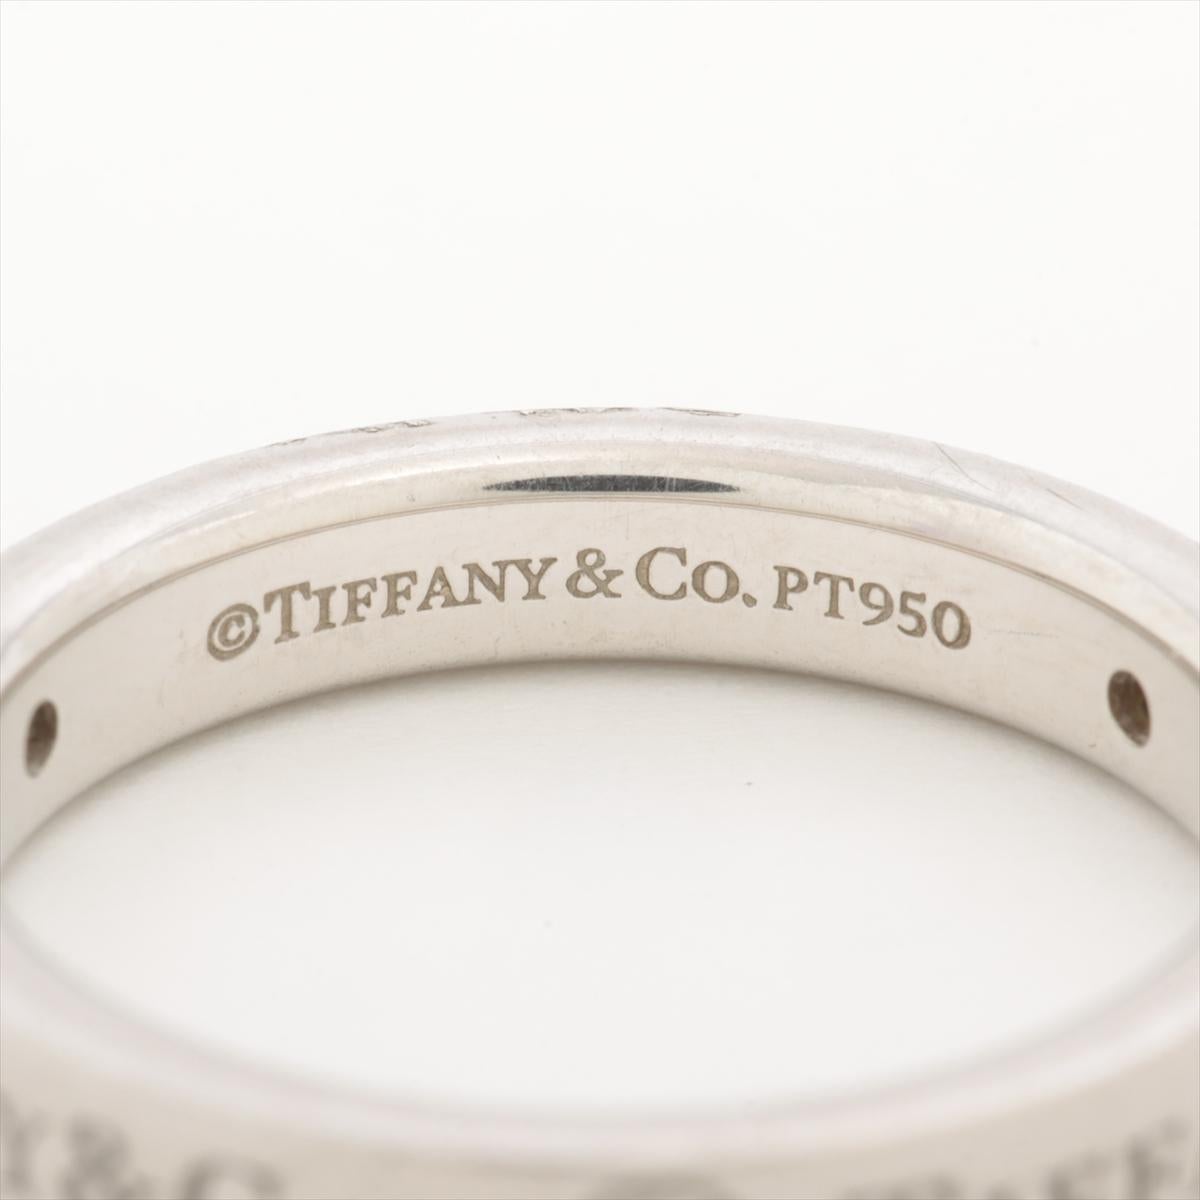 The Tiffany & Co. Flat Band Diamond Ring a mesmerizing blend of modern design and timeless elegance. The ring features a flat band silhouette adorned with exquisite diamonds, creating a captivating piece that radiates sophistication. The sleek and